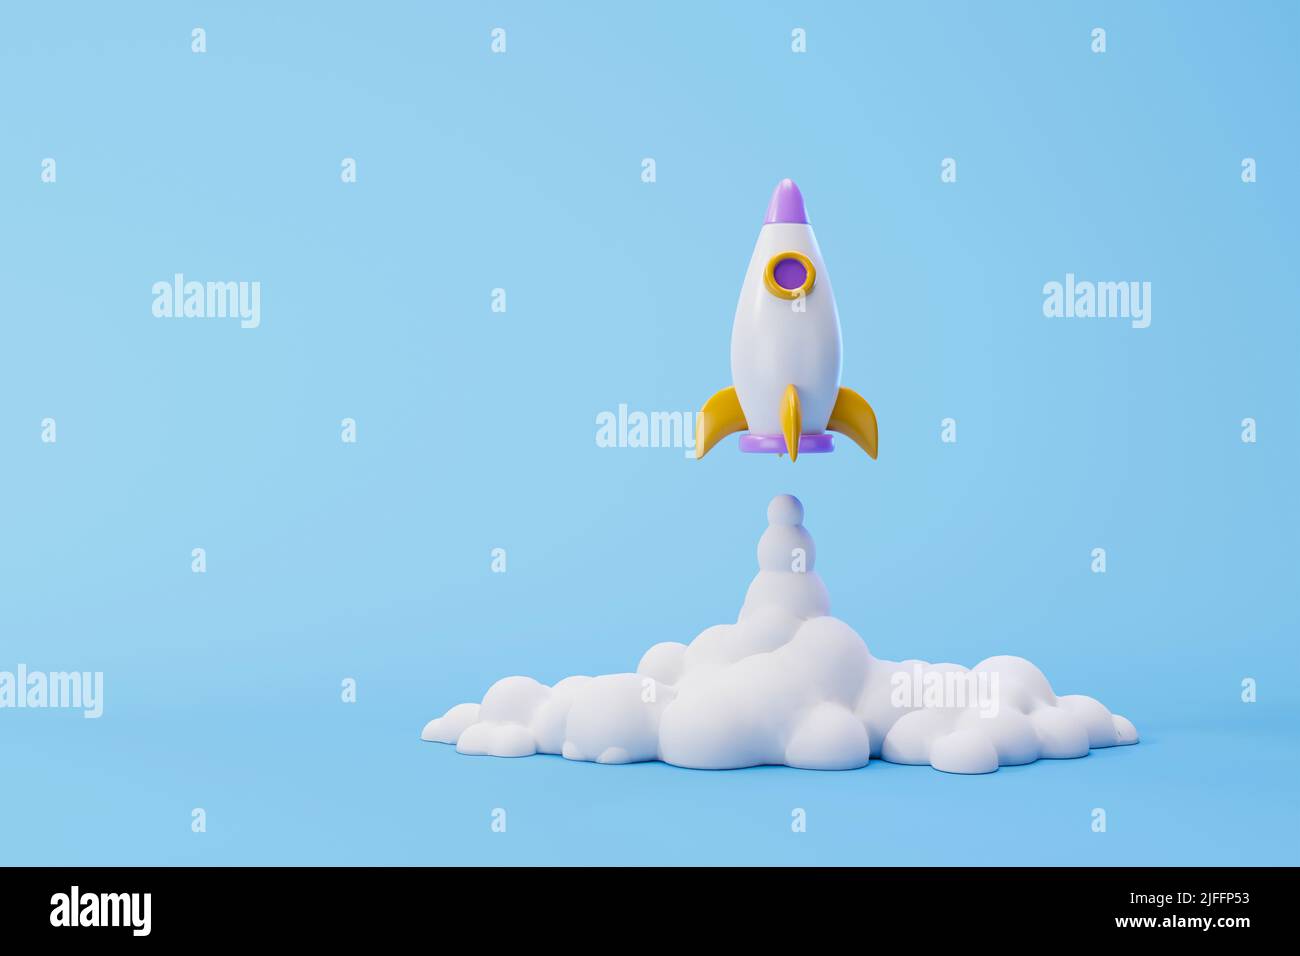 Rocket launch on blue background, Spaceship icon, startup business concept. 3d illustration Stock Photo